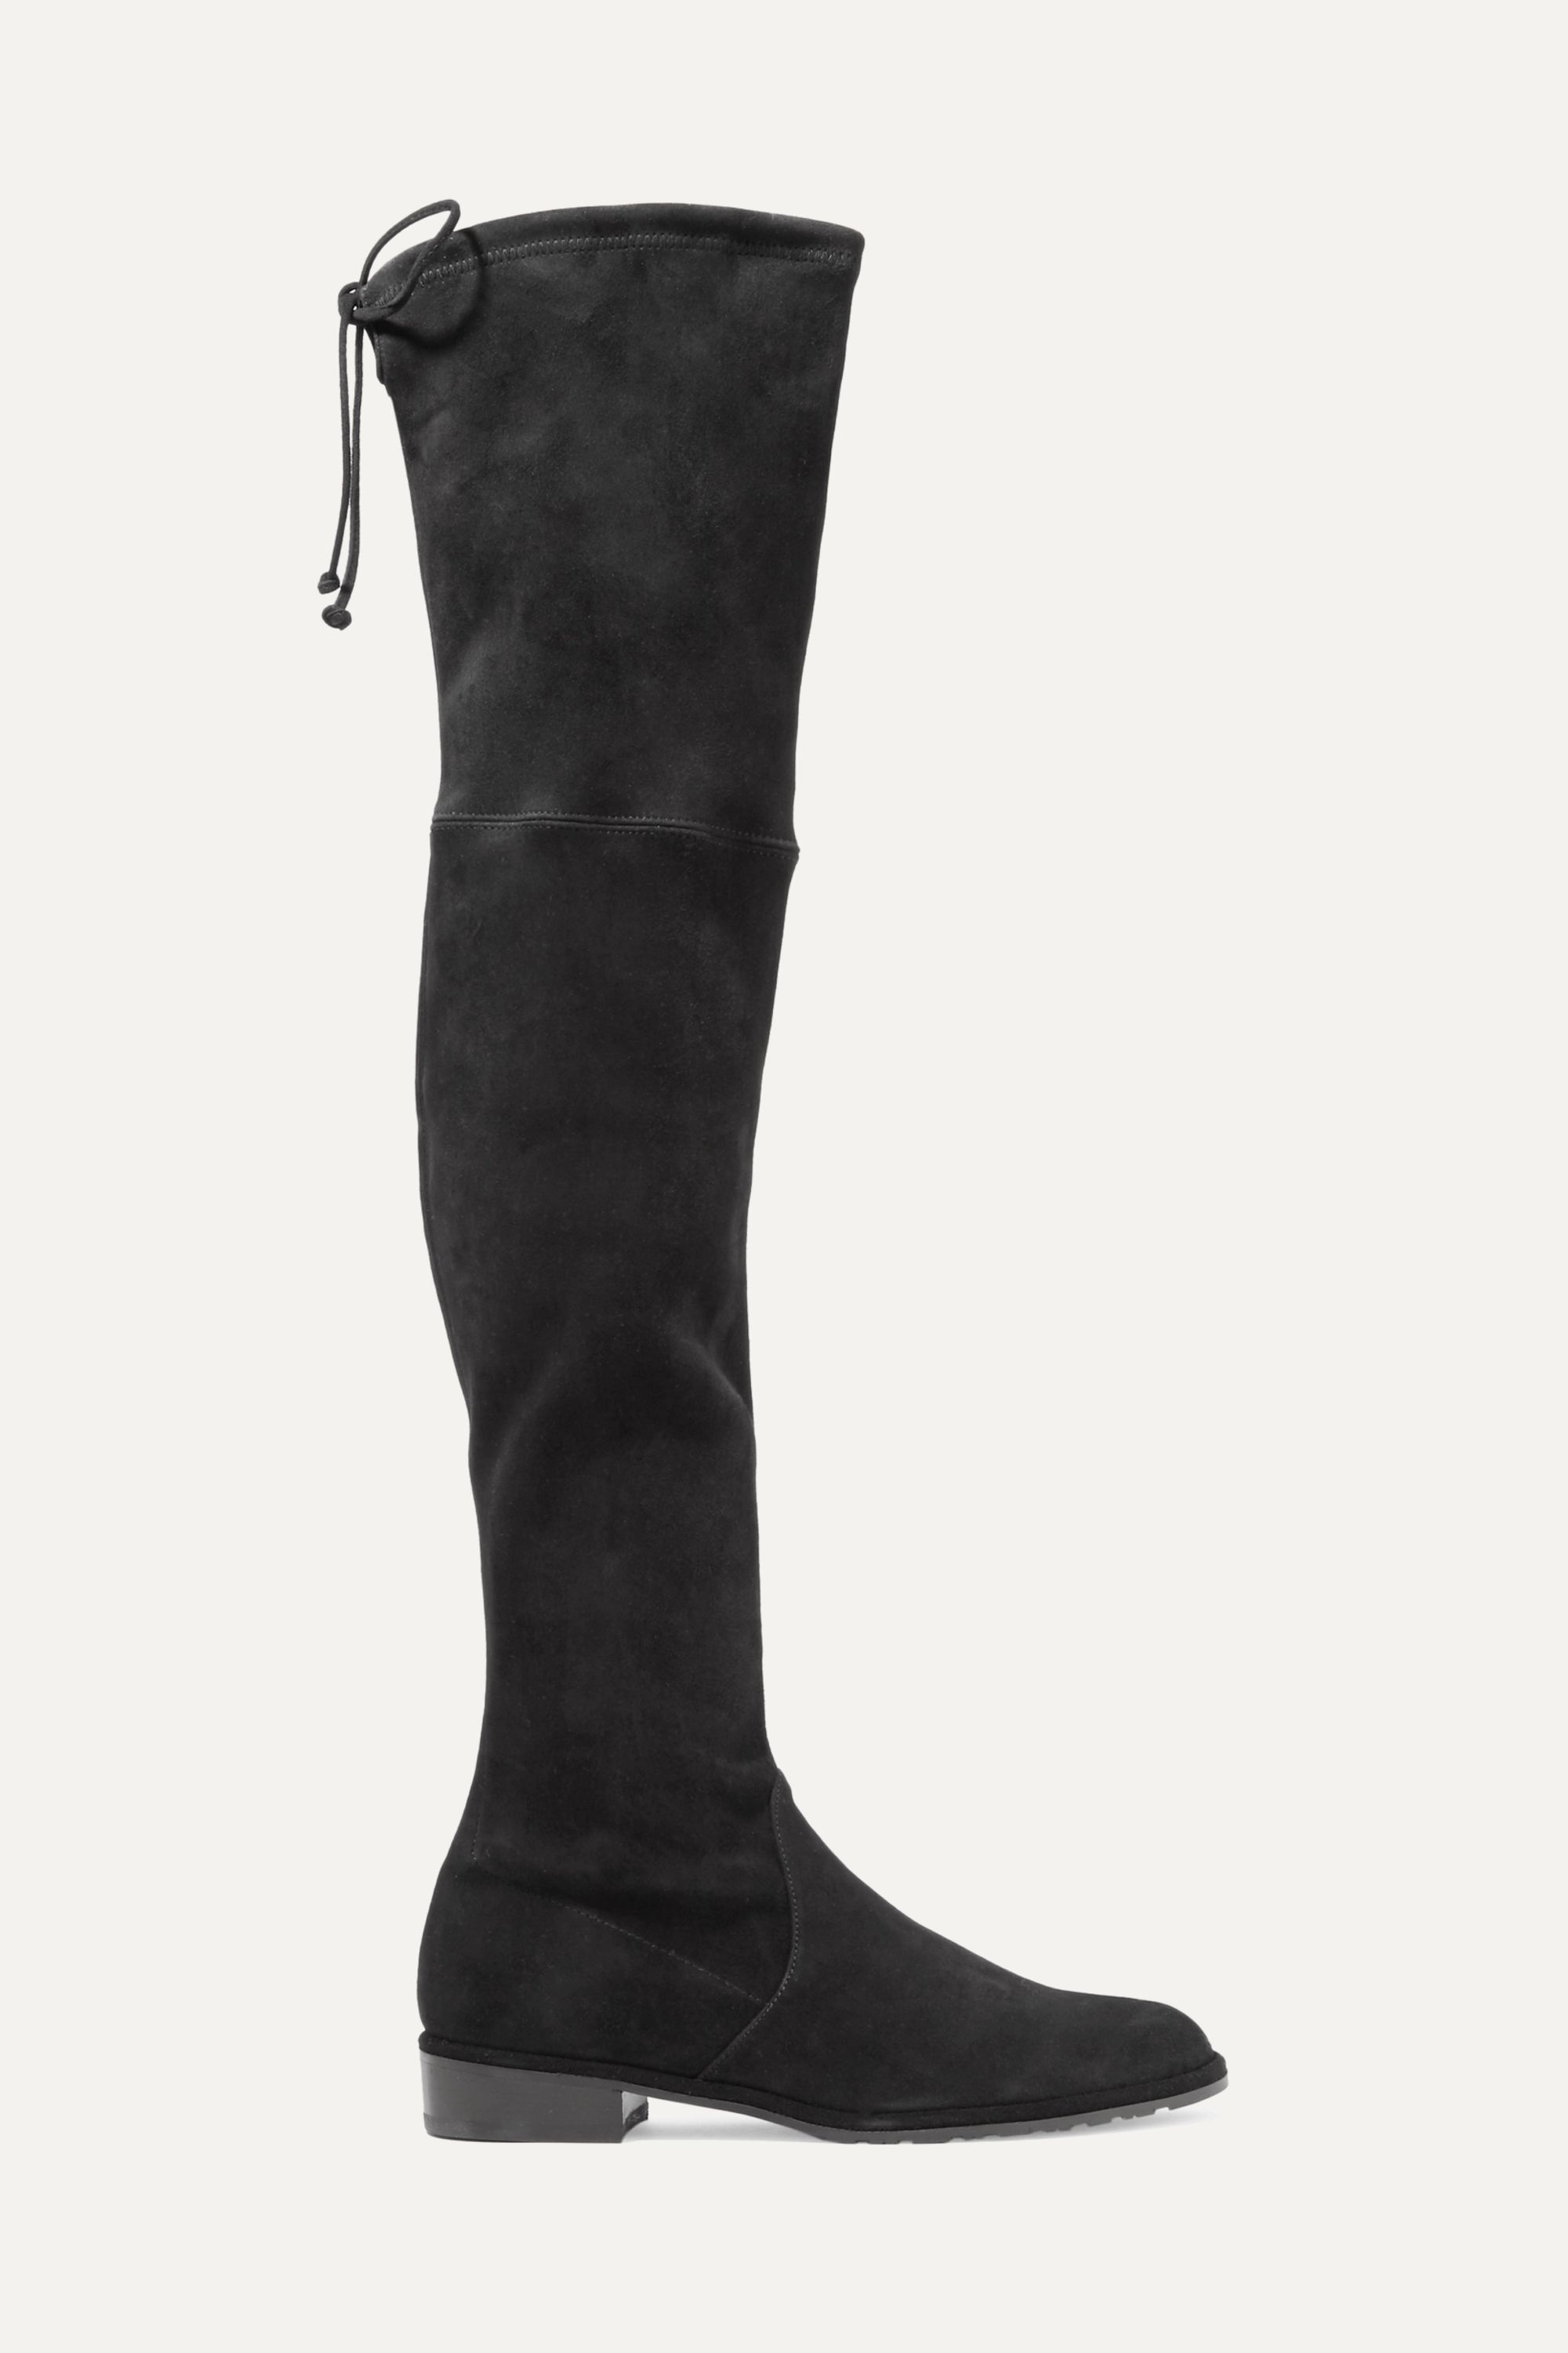 Details about   Ruanyu Womens Winter Knee High Boots Riding Strappy Lace Up Low Heel Combat Boot